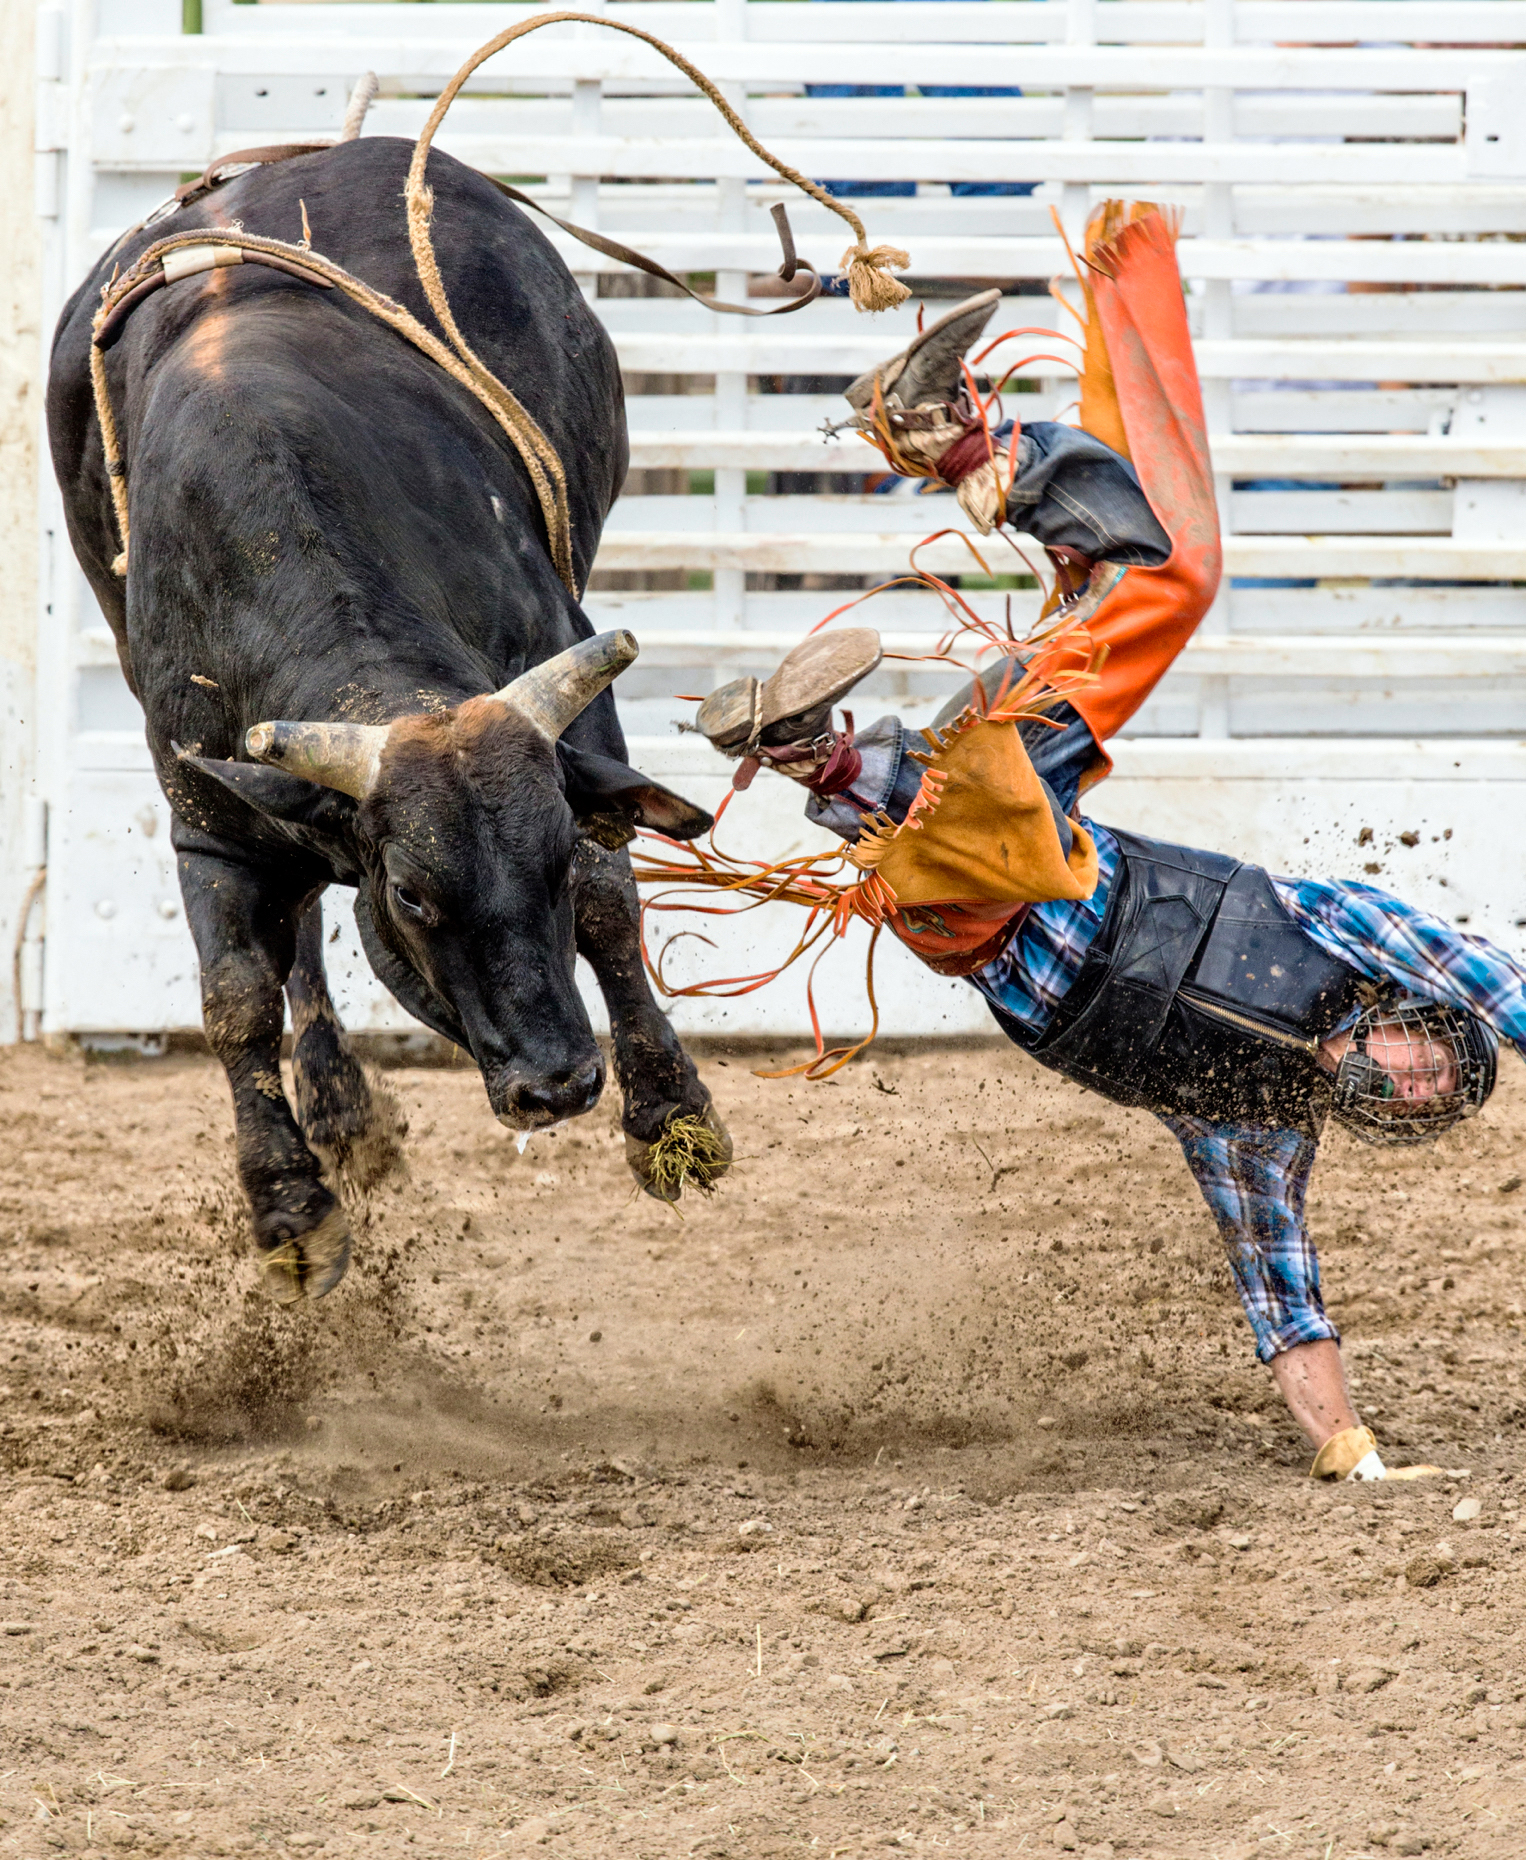 Young cowboy riding a small bull in the Junior Steer Riding competition, Chaffee County Fair & Rodeo